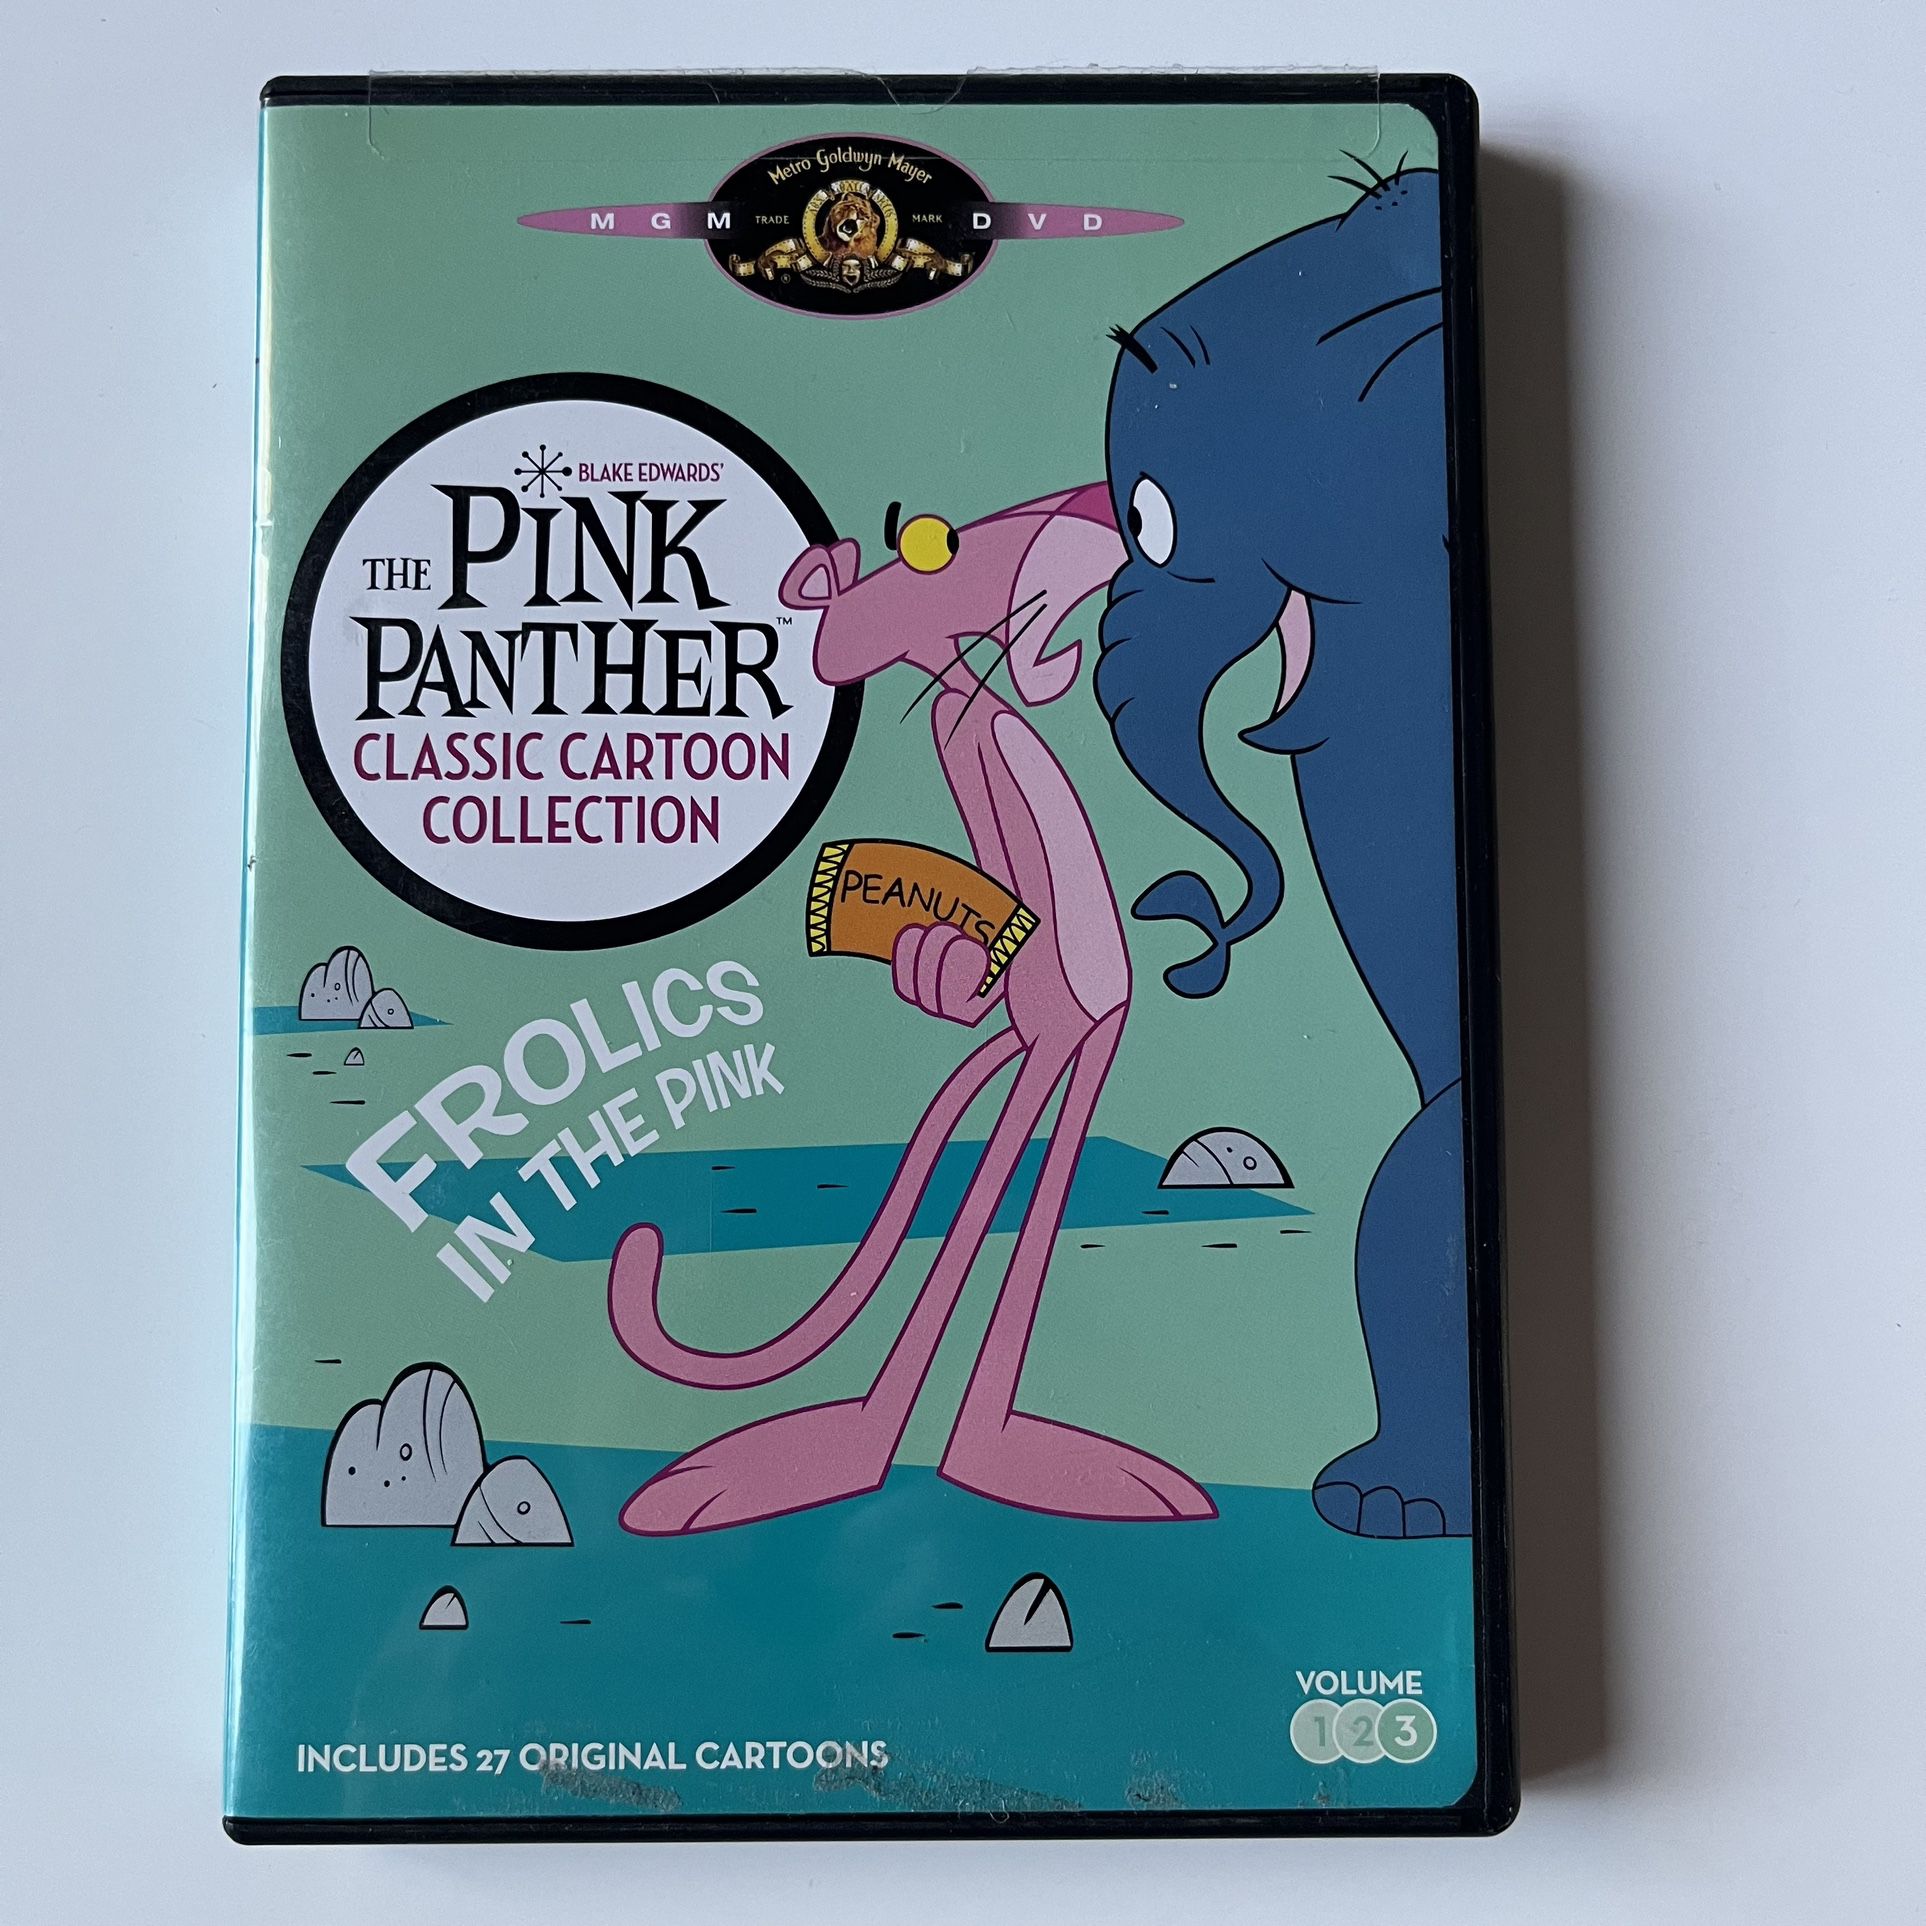 The Pink Panther Classic Cartoon Collection, Vol. 3: Frolics in the Pink DVD